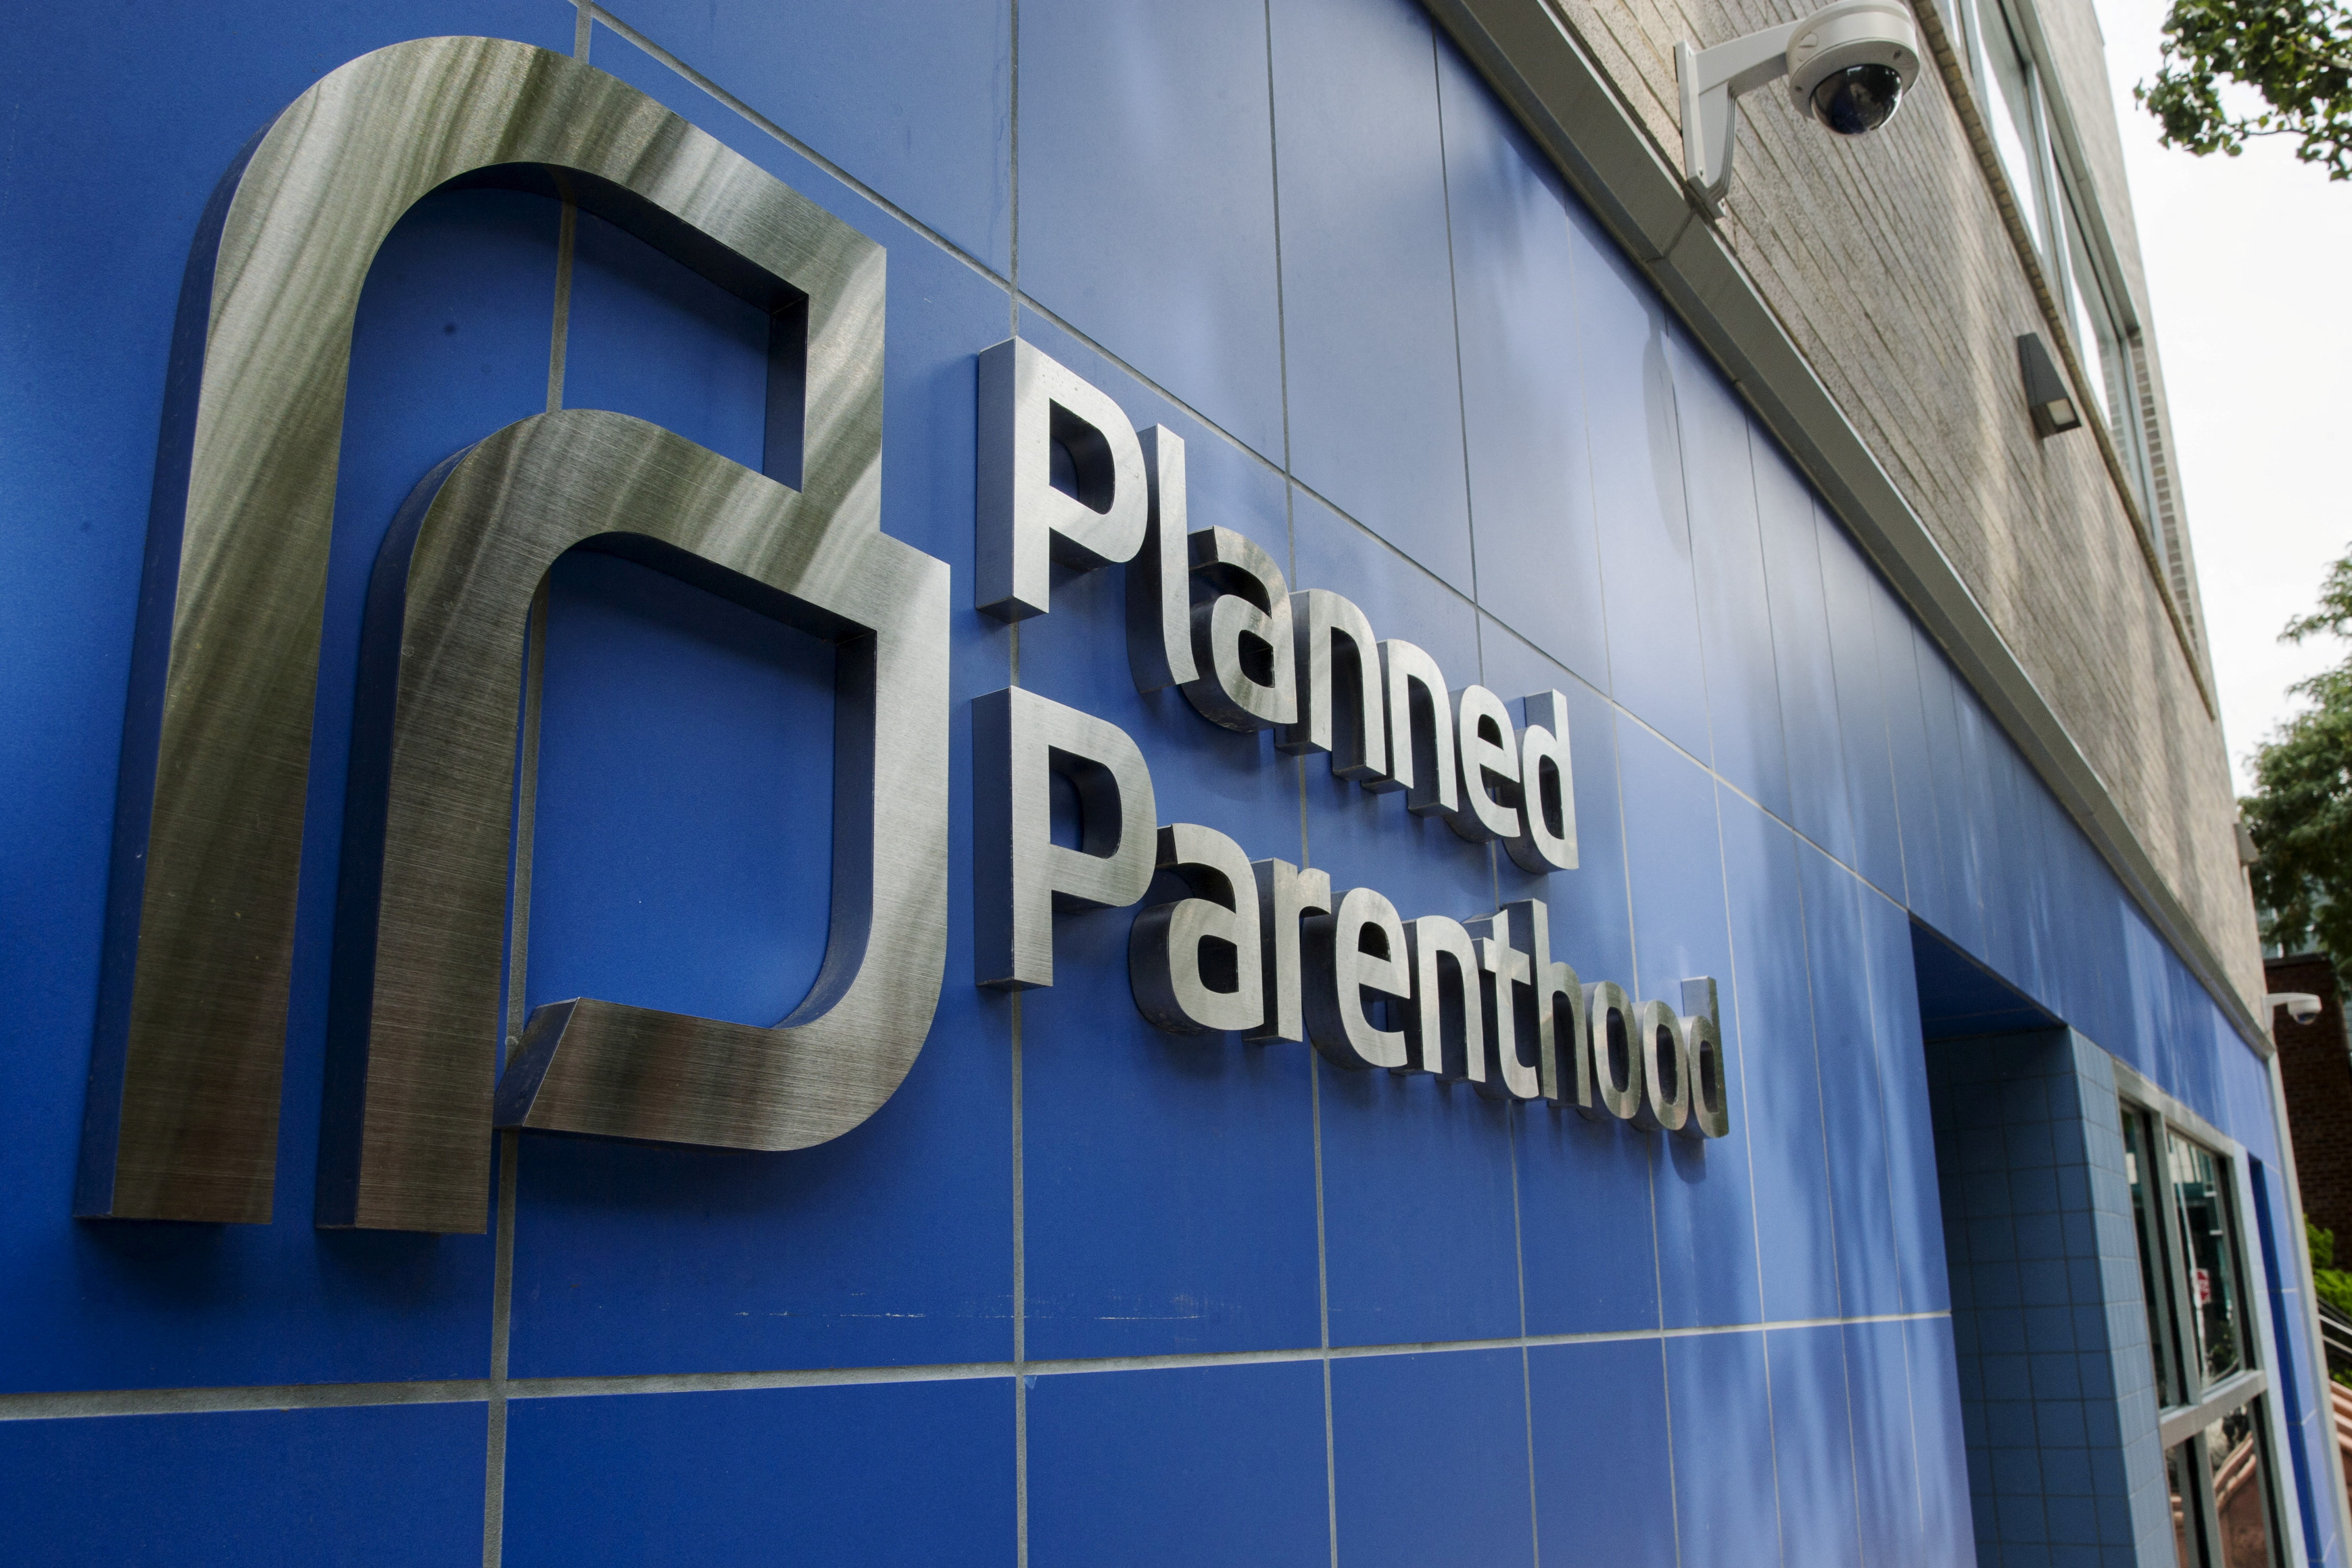 A sign is pictured at the entrance to a Planned Parenthood building in New York